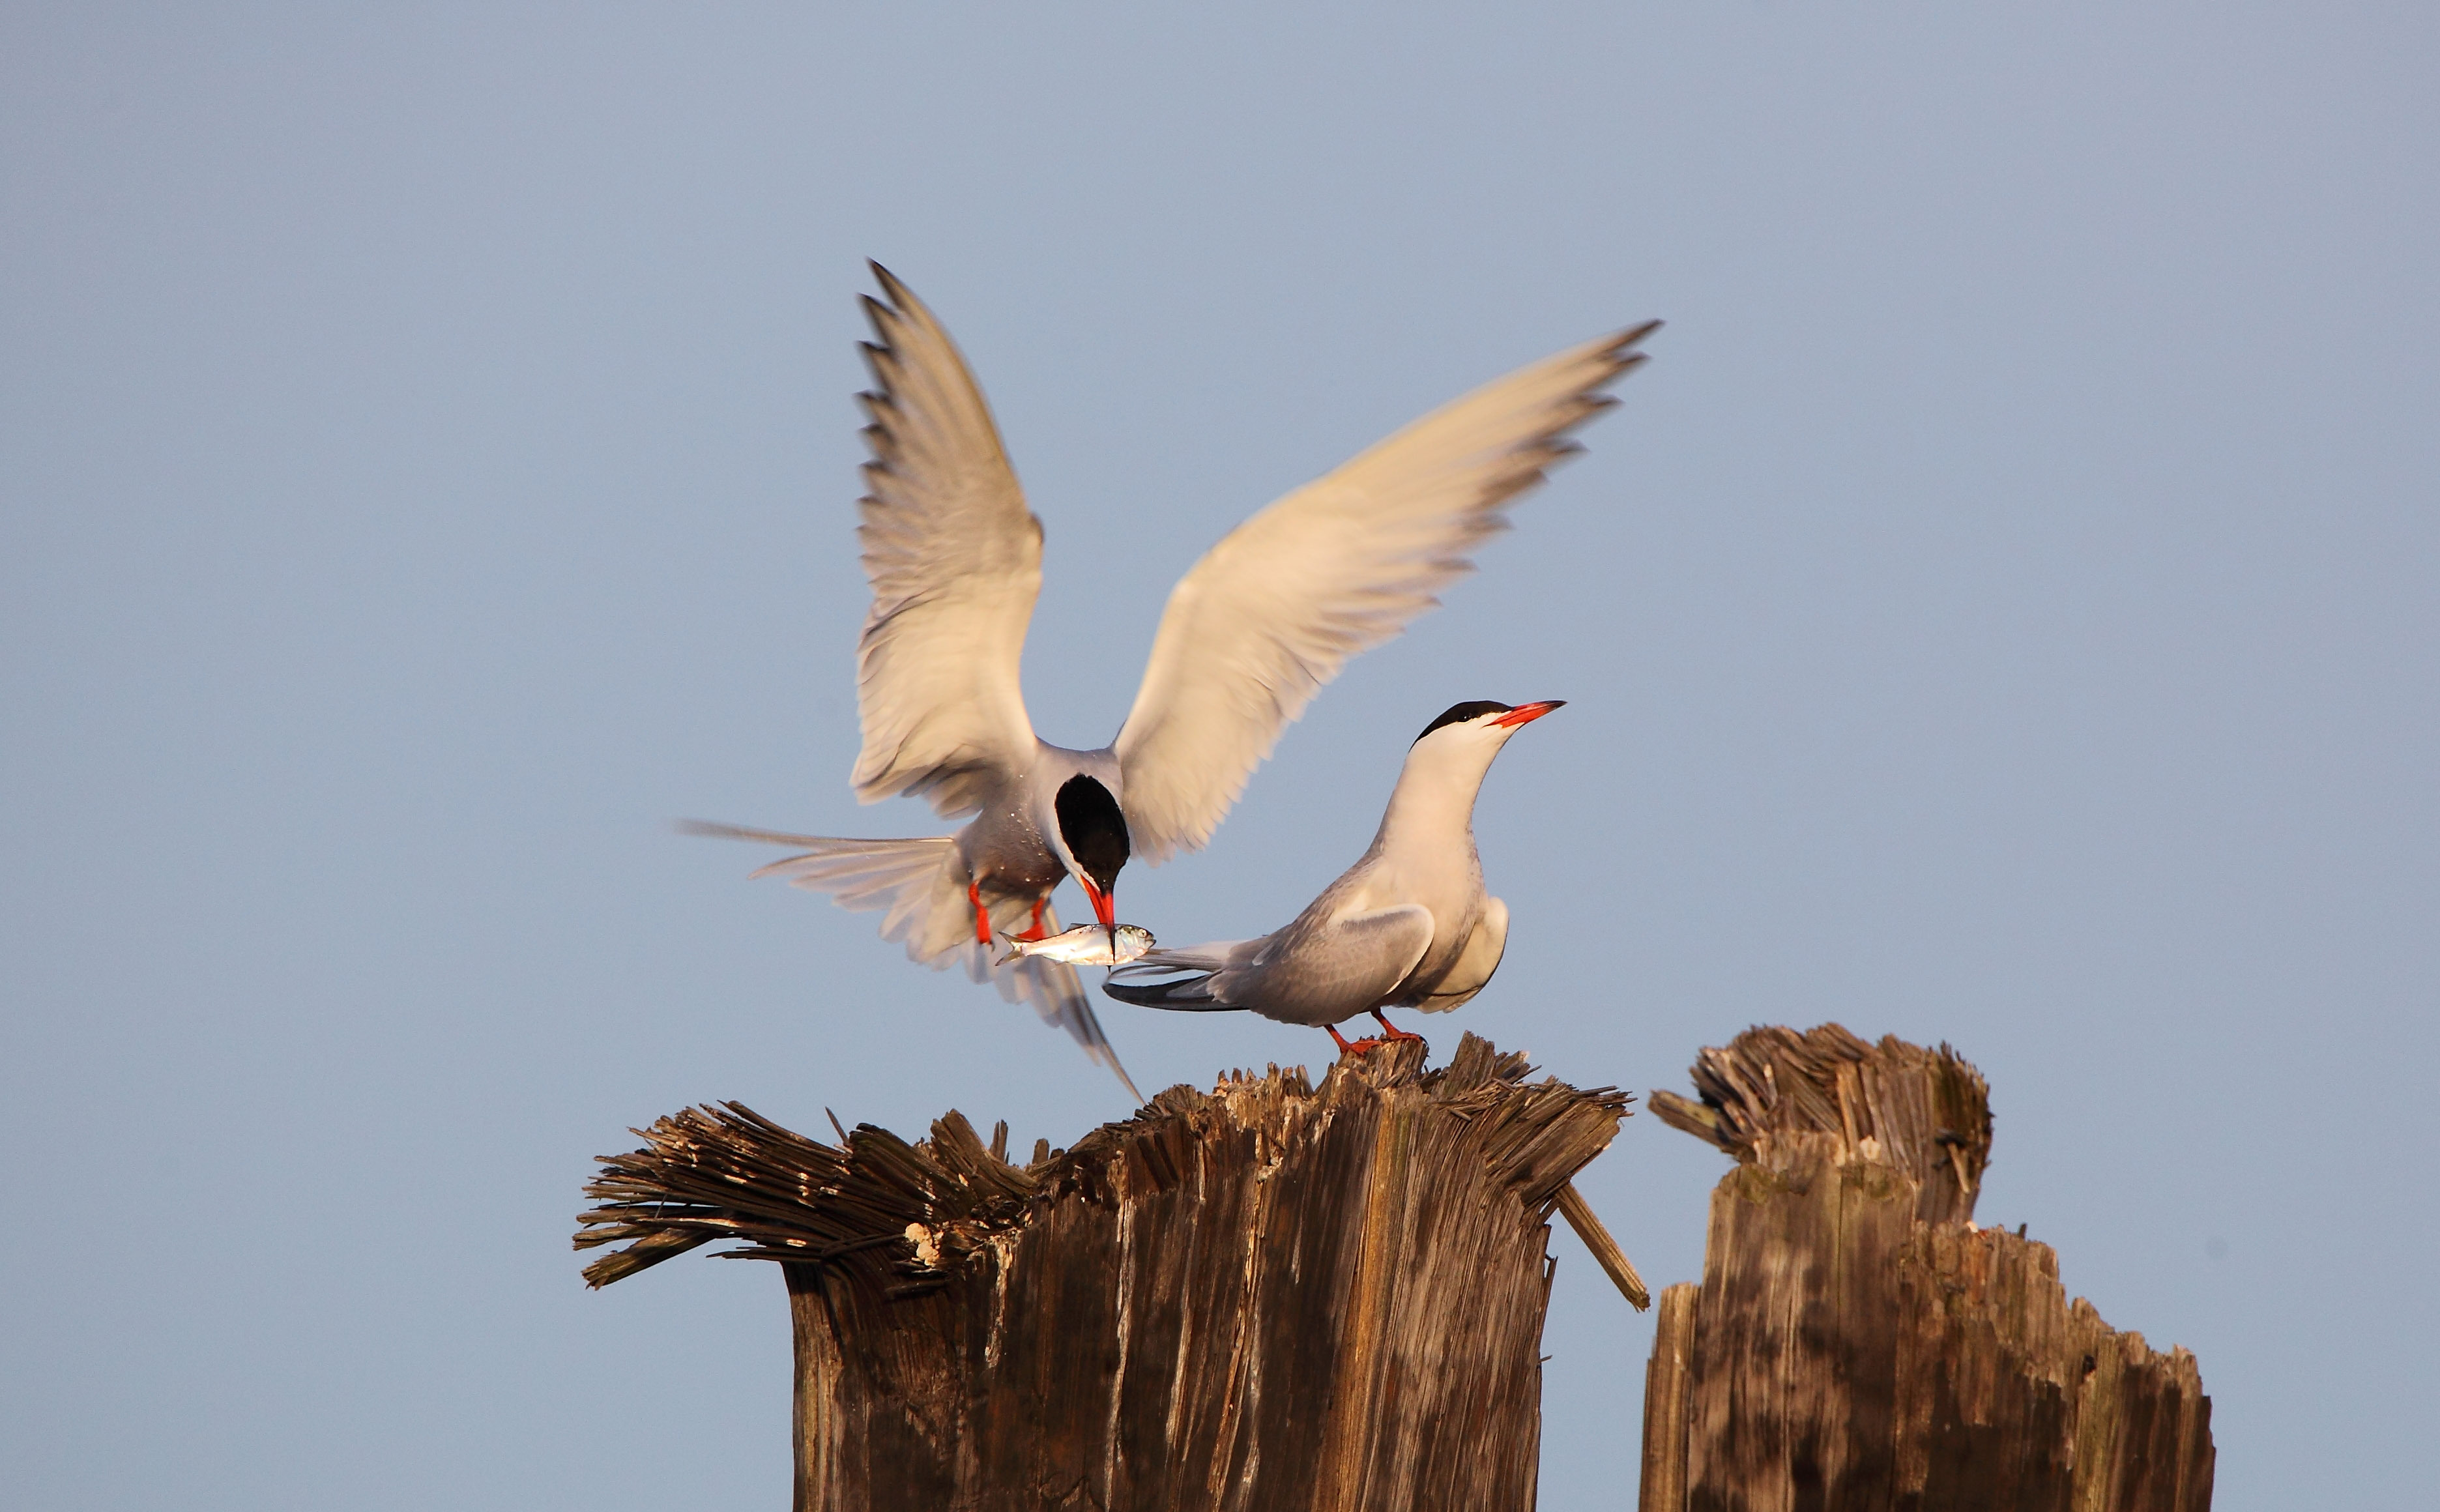 Common Terns court in Great Kills Harbor. Photo: <a href="https://www.flickr.com/photos/51819896@N04/" target="_blank">Lawrence Pugliares</a>